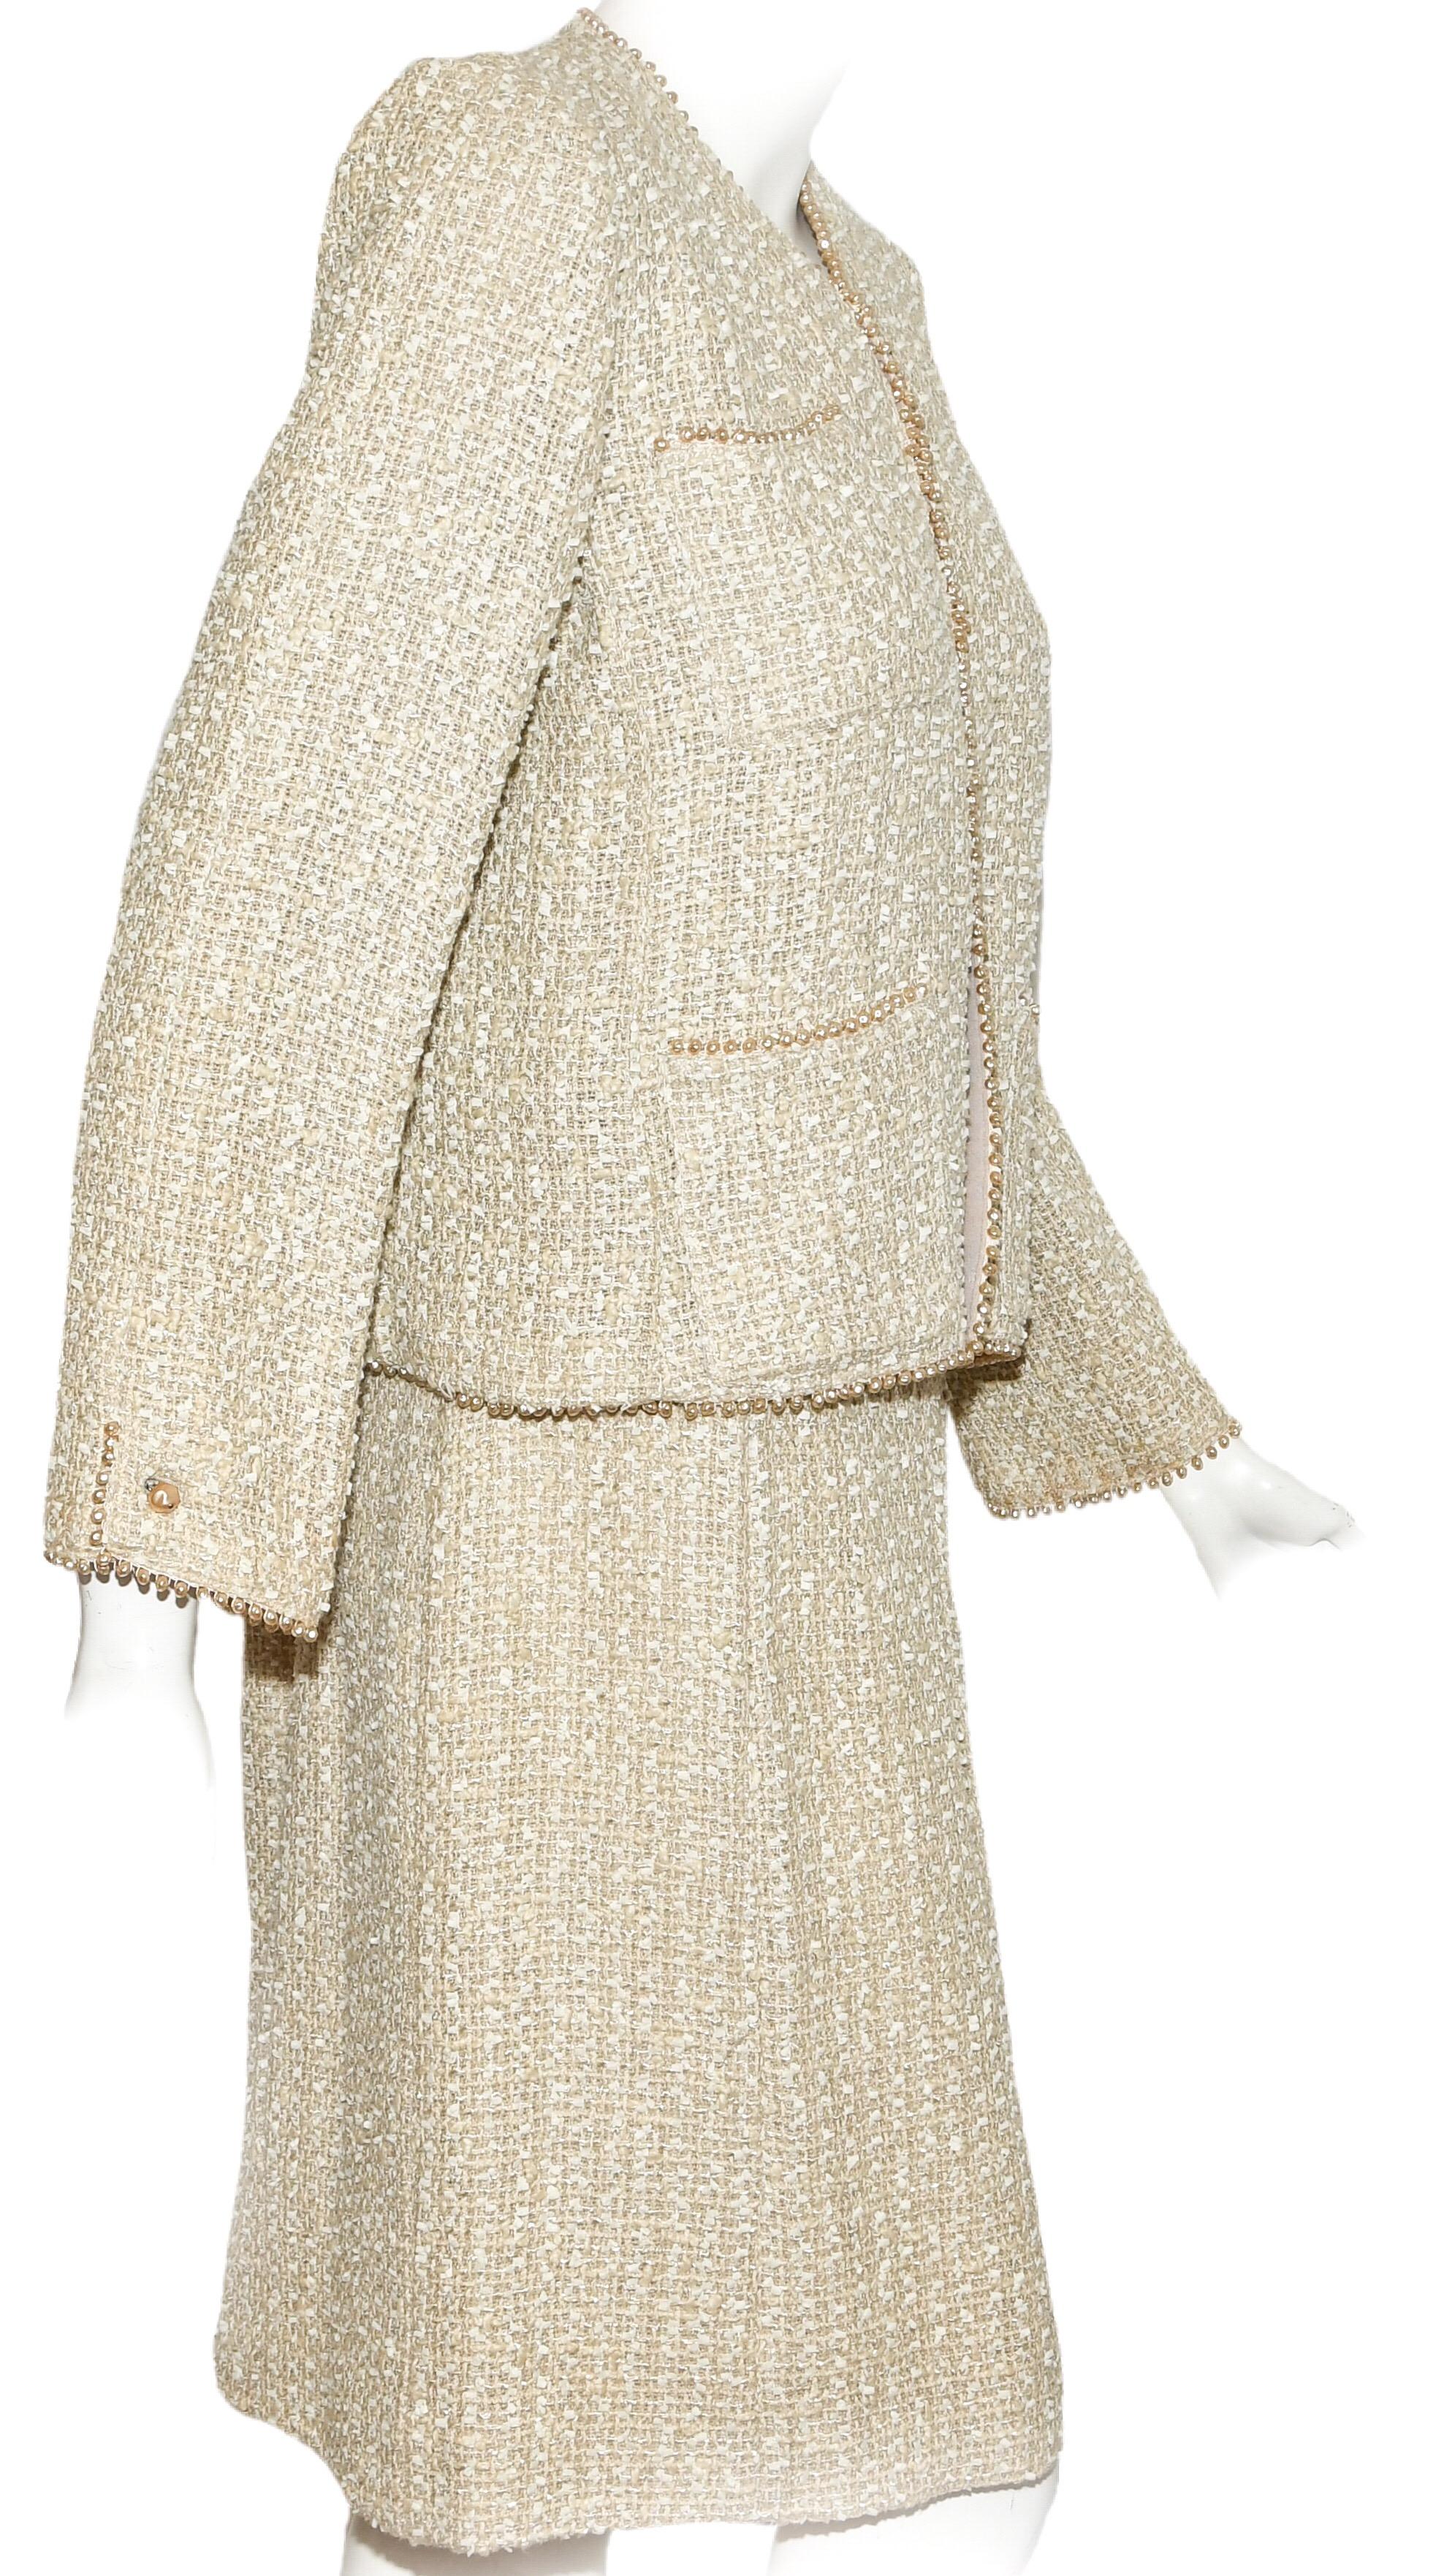 Consistent Chanel Nacar Beige Pearl Trimmed Spring '99 Skirt Suit 38 In Excellent Condition For Sale In Palm Beach, FL